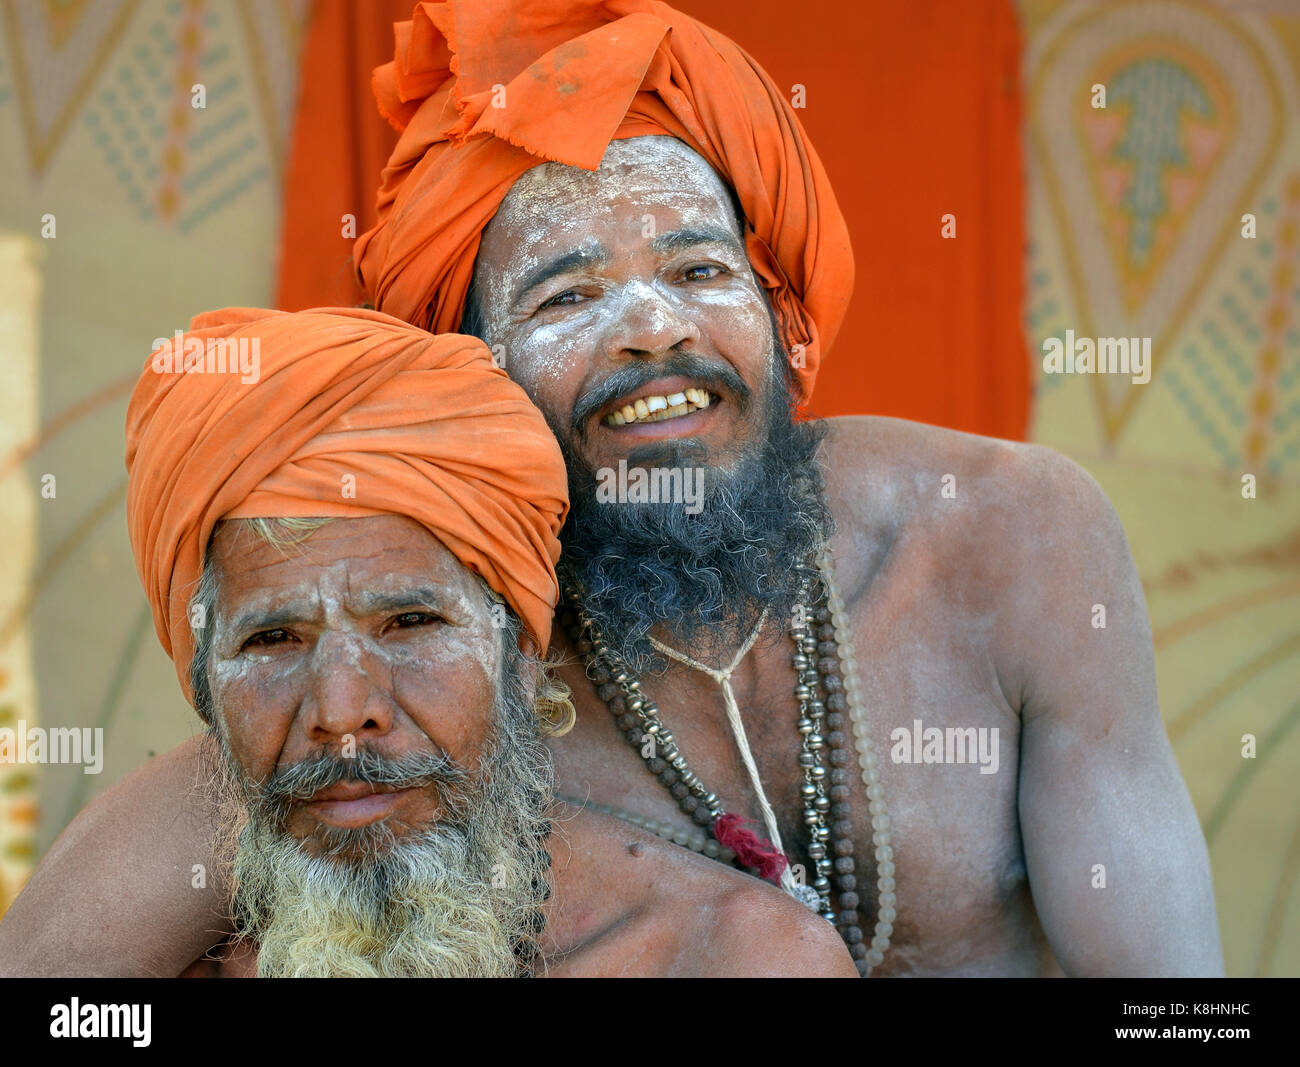 Two happy Indian Hindu sadhus with orange turbans and sacred white ash all over their faces, beards and bodies, hugging each other in a close embrace Stock Photo